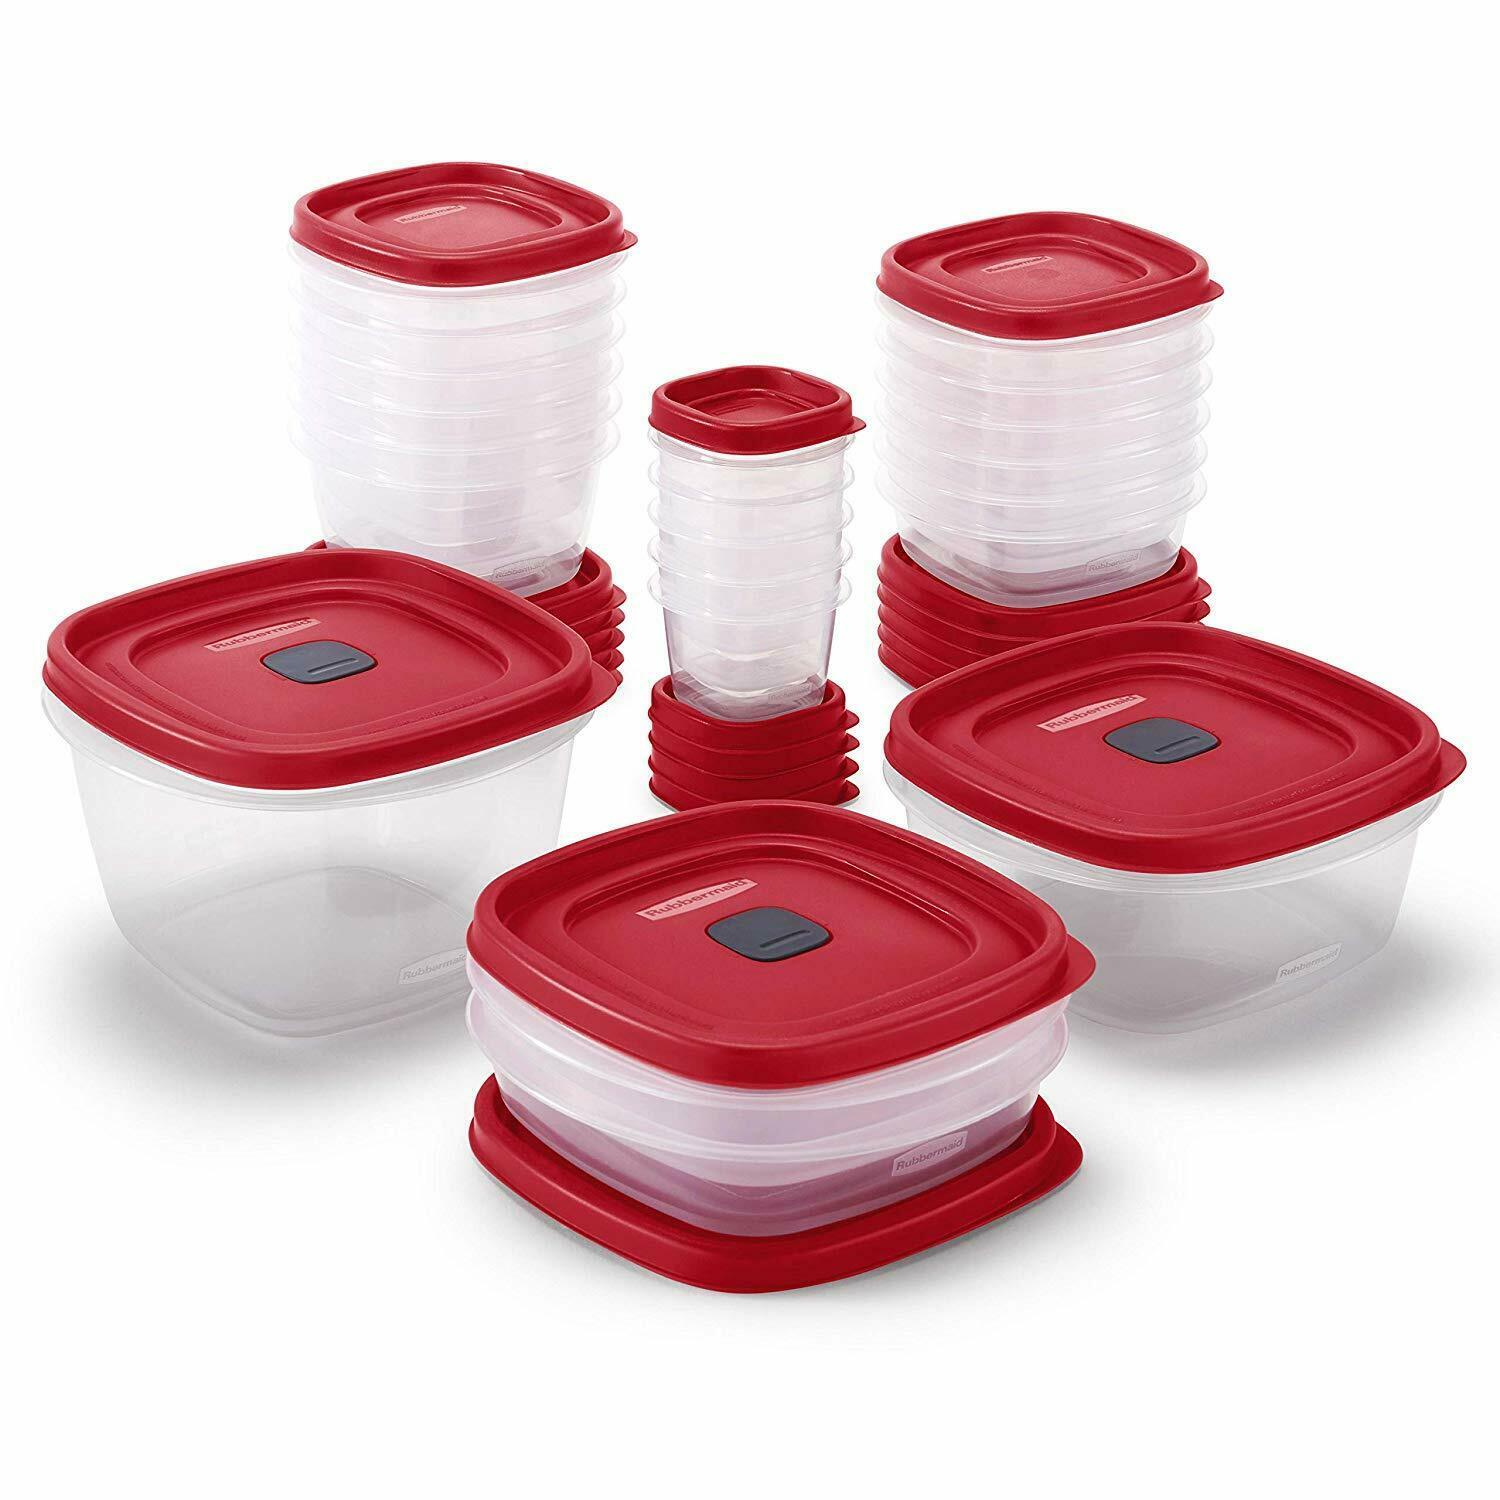 Rubbermaid New 42 62 Piece Vented Lids Food And 50 Similar Items